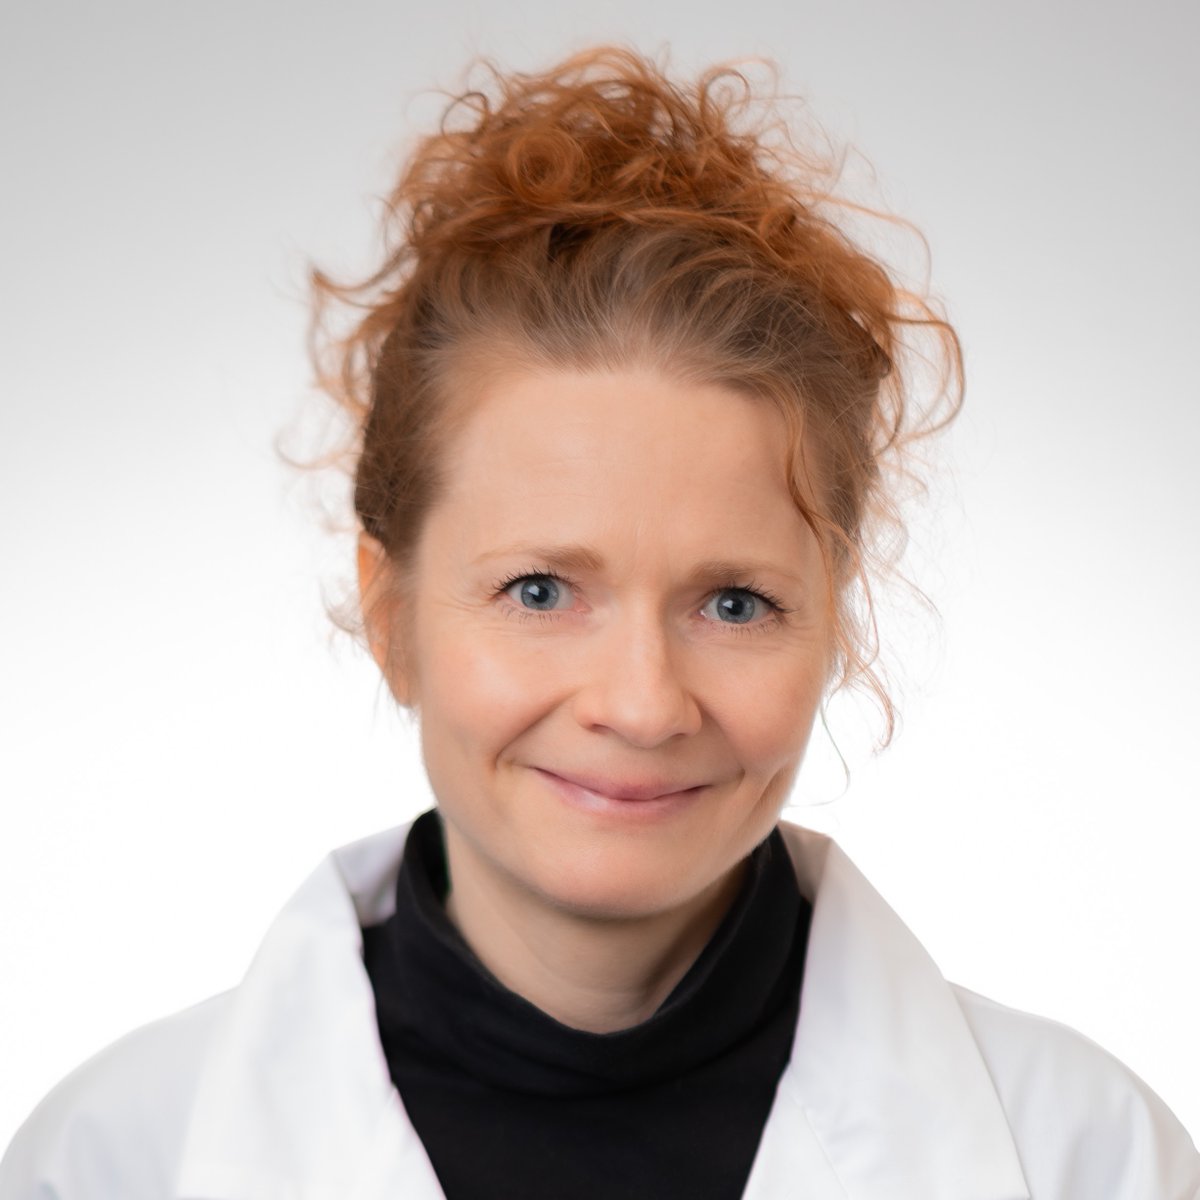 ‼️We are delighted to share the appointment of Dr. Genna Beattie as an Assistant Professor of Clinical Surgery, specializing in Trauma & Critical Care, effective this Fall. Dr. Beattie will be bringing her expertise to @UCSF_EastBay Surgery at Highland Hospital @AlamedaHealth🥳